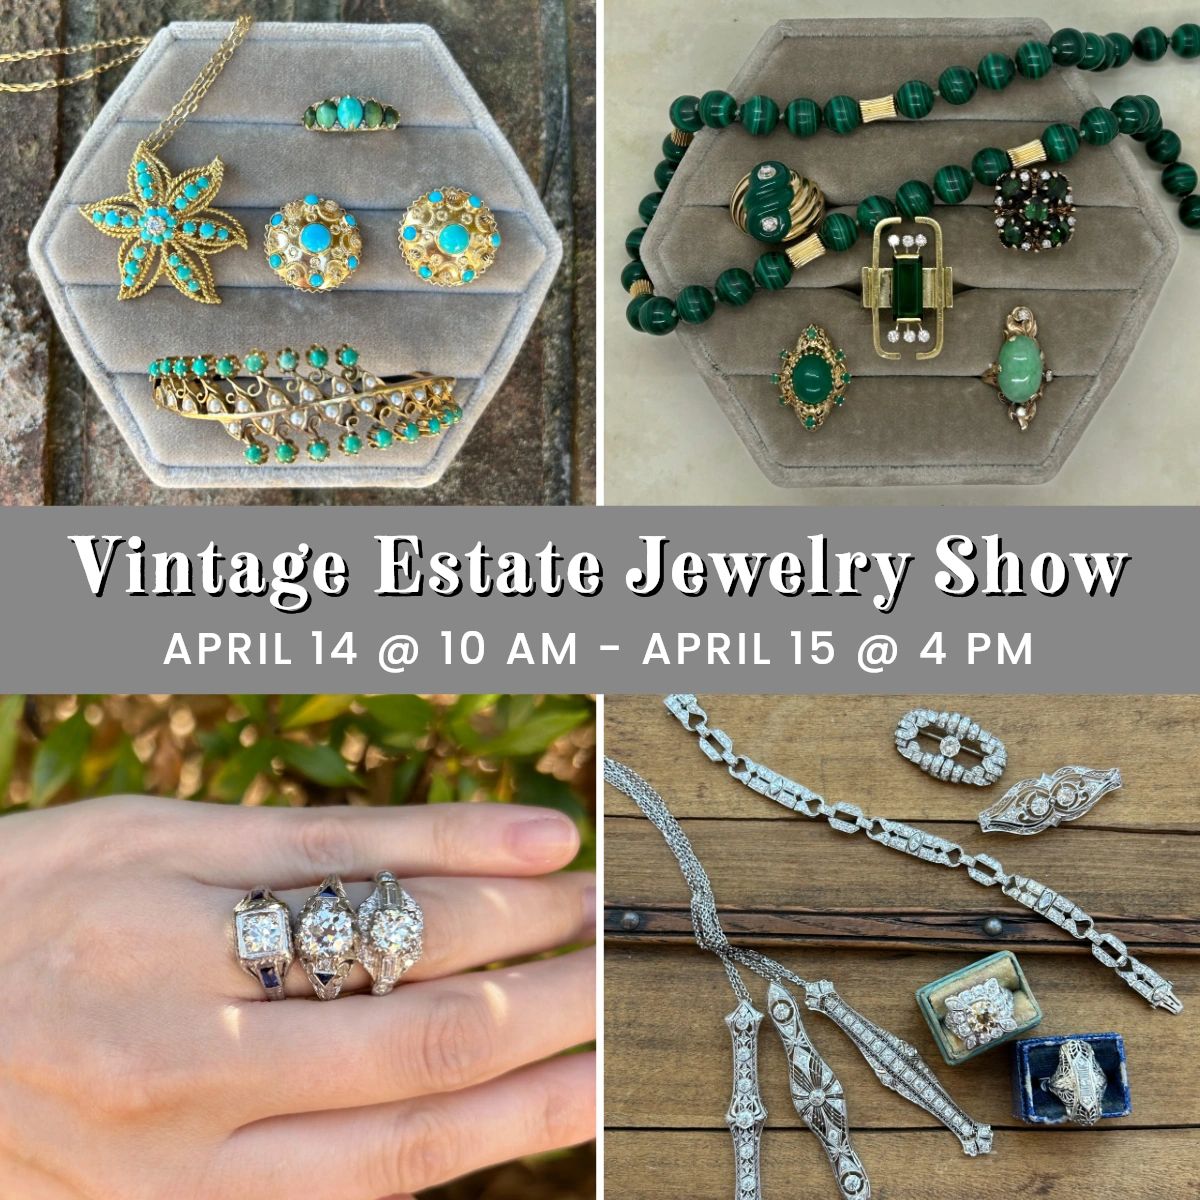 Join us today and tomorrow (April 14 and 15) for our vintage estate jewelry show! Explore one-of-a-kind pieces from different eras, like Victorian, art deco, Edwardian, and mid-century.

#VintageJewelry #VictorianJewelry #GabrielAndCoRetailer #GabrielAndCo #GabrielNY